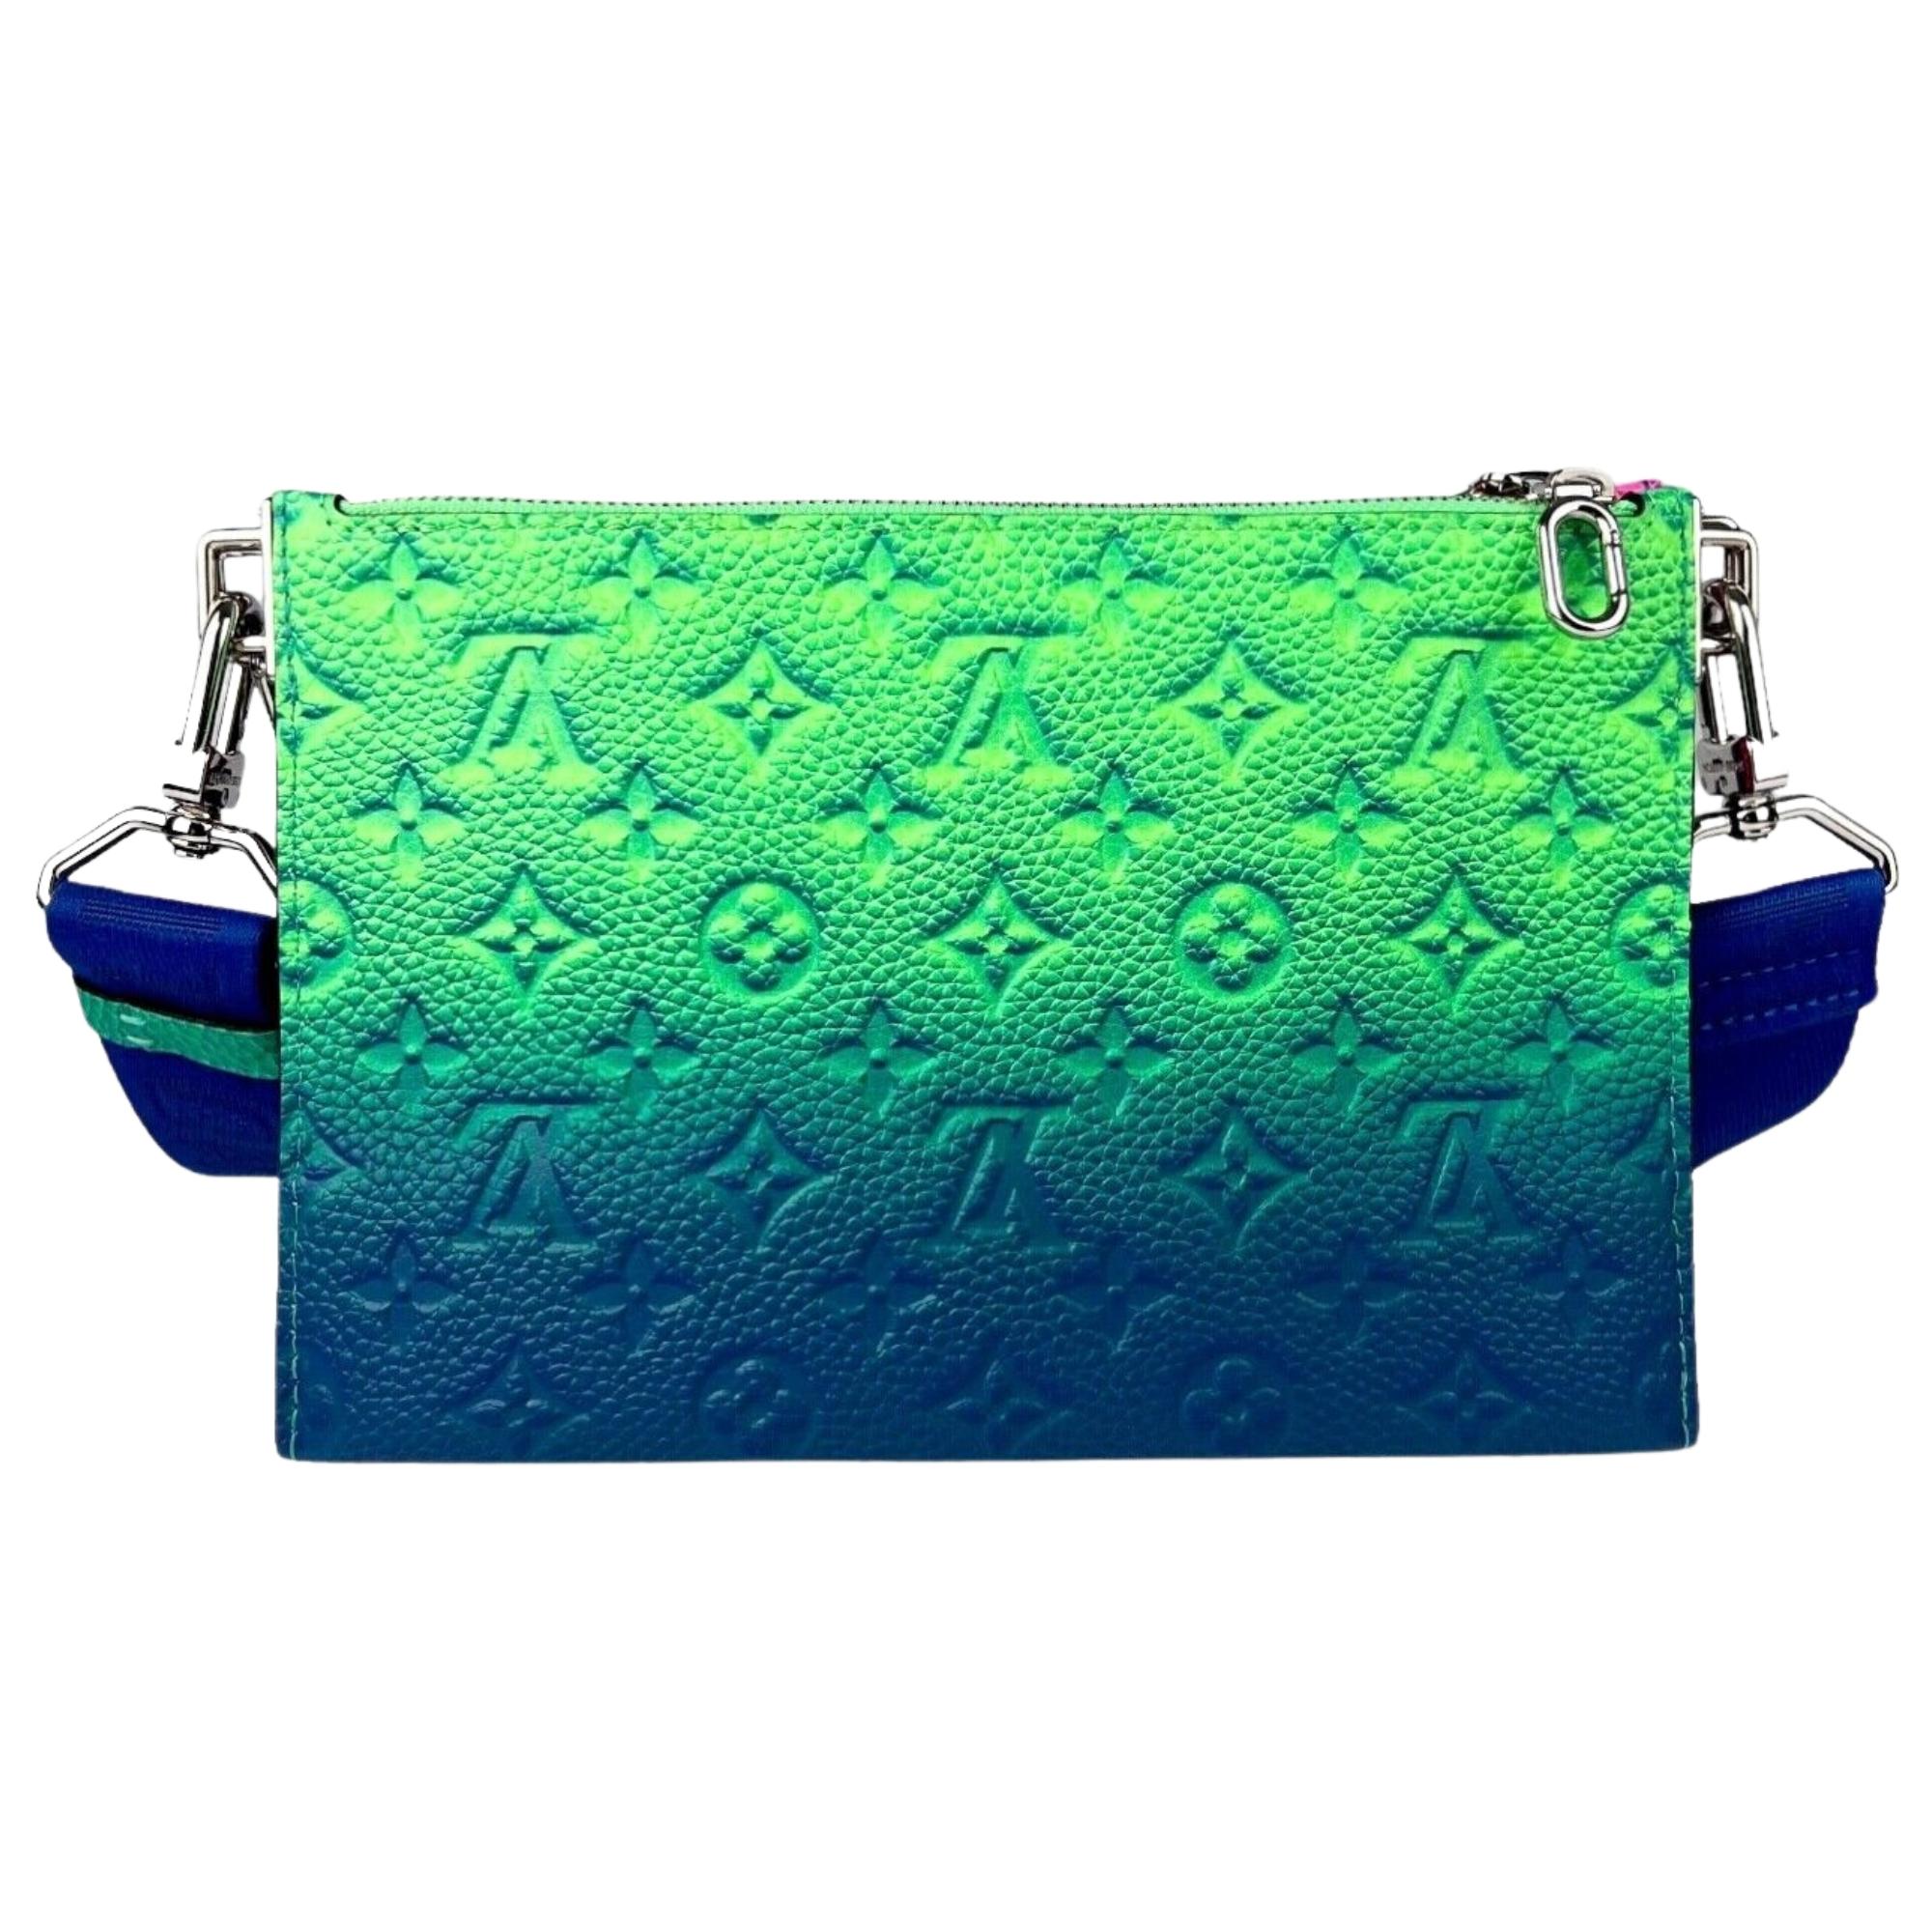 This trio messenger pouch bag from Louis Vuitton Spring/Summer 2022 Collection by Virgil Abloh is made of monogram embossed calfskin leather in neon colors. The bags feature Taurillon Illusion leather construction with fluorescent shades of blue,